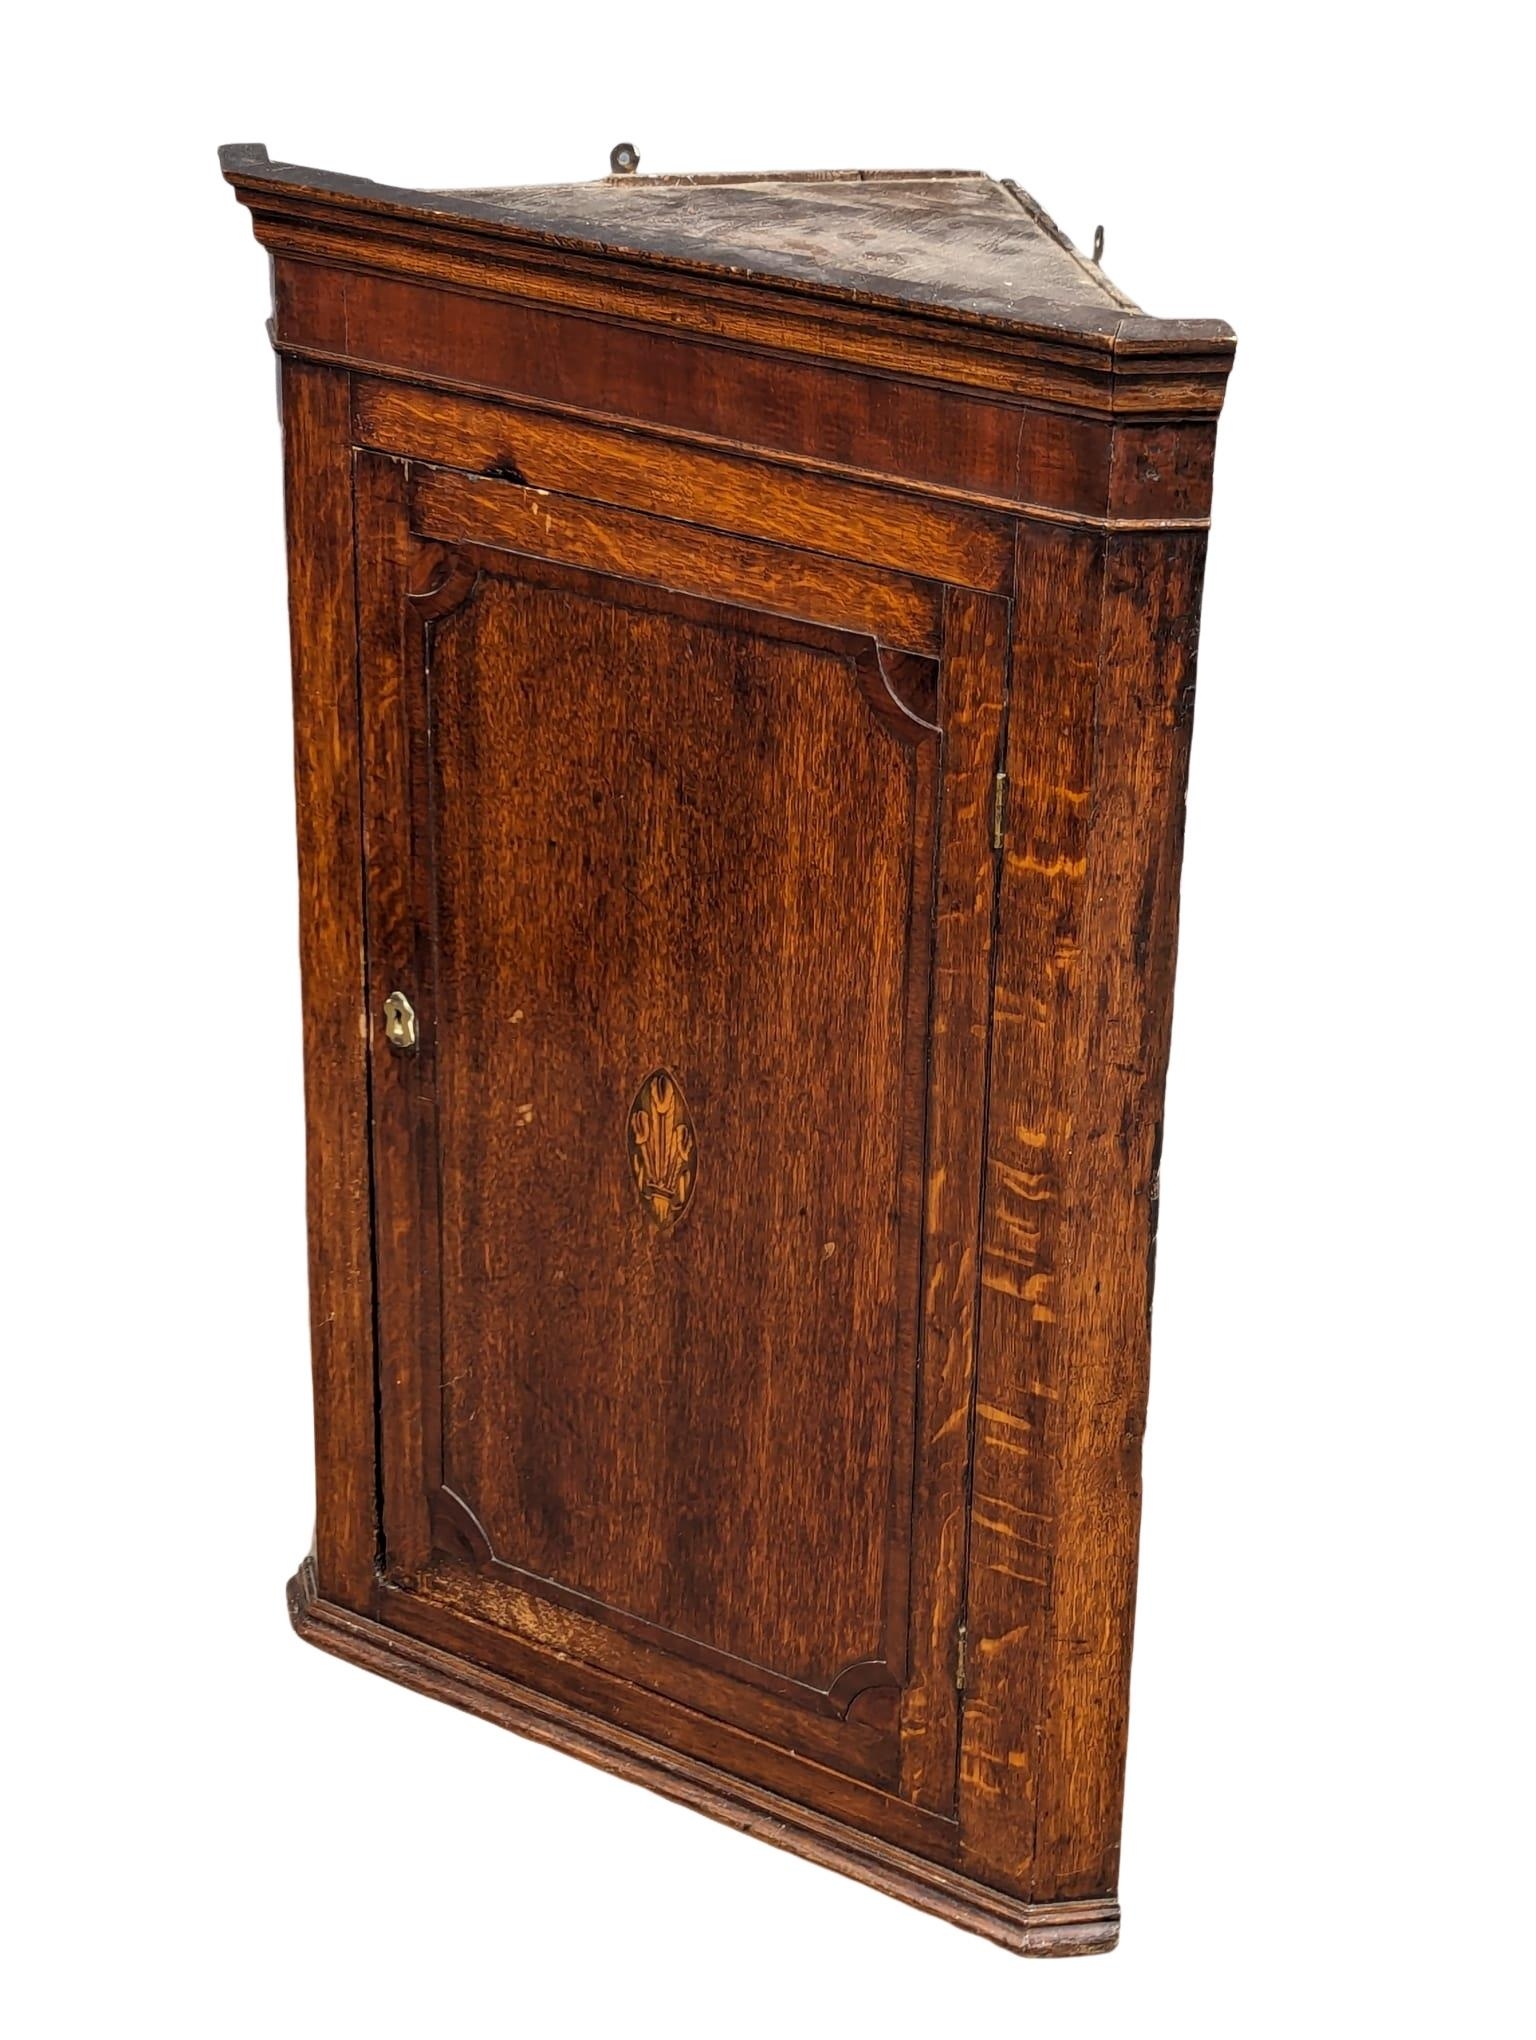 A George III inlaid oak wall hanging corner cabinet with fitted shelves. Circa 1790-1800. 69.5x38. - Image 2 of 5